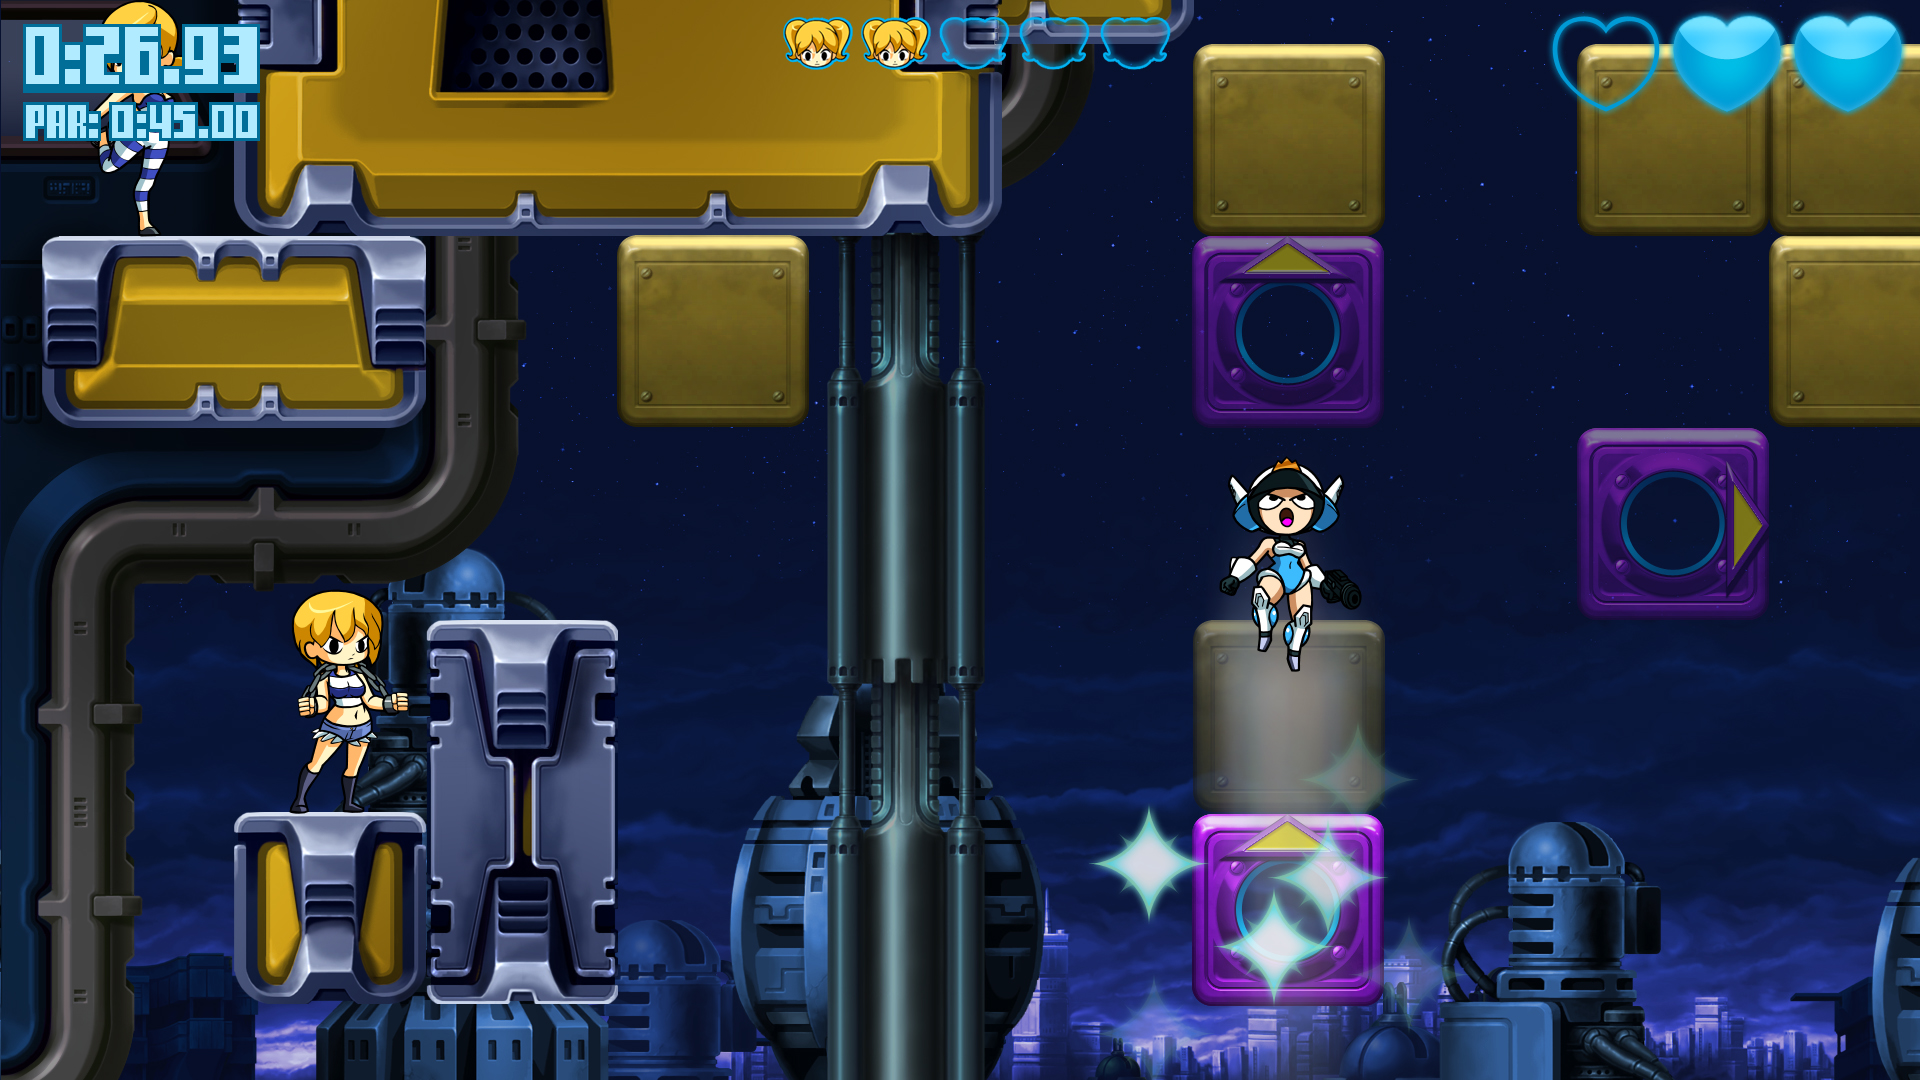 Mighty Switch Force! Hyper Drive Edition Steam CD Key 5.64 $